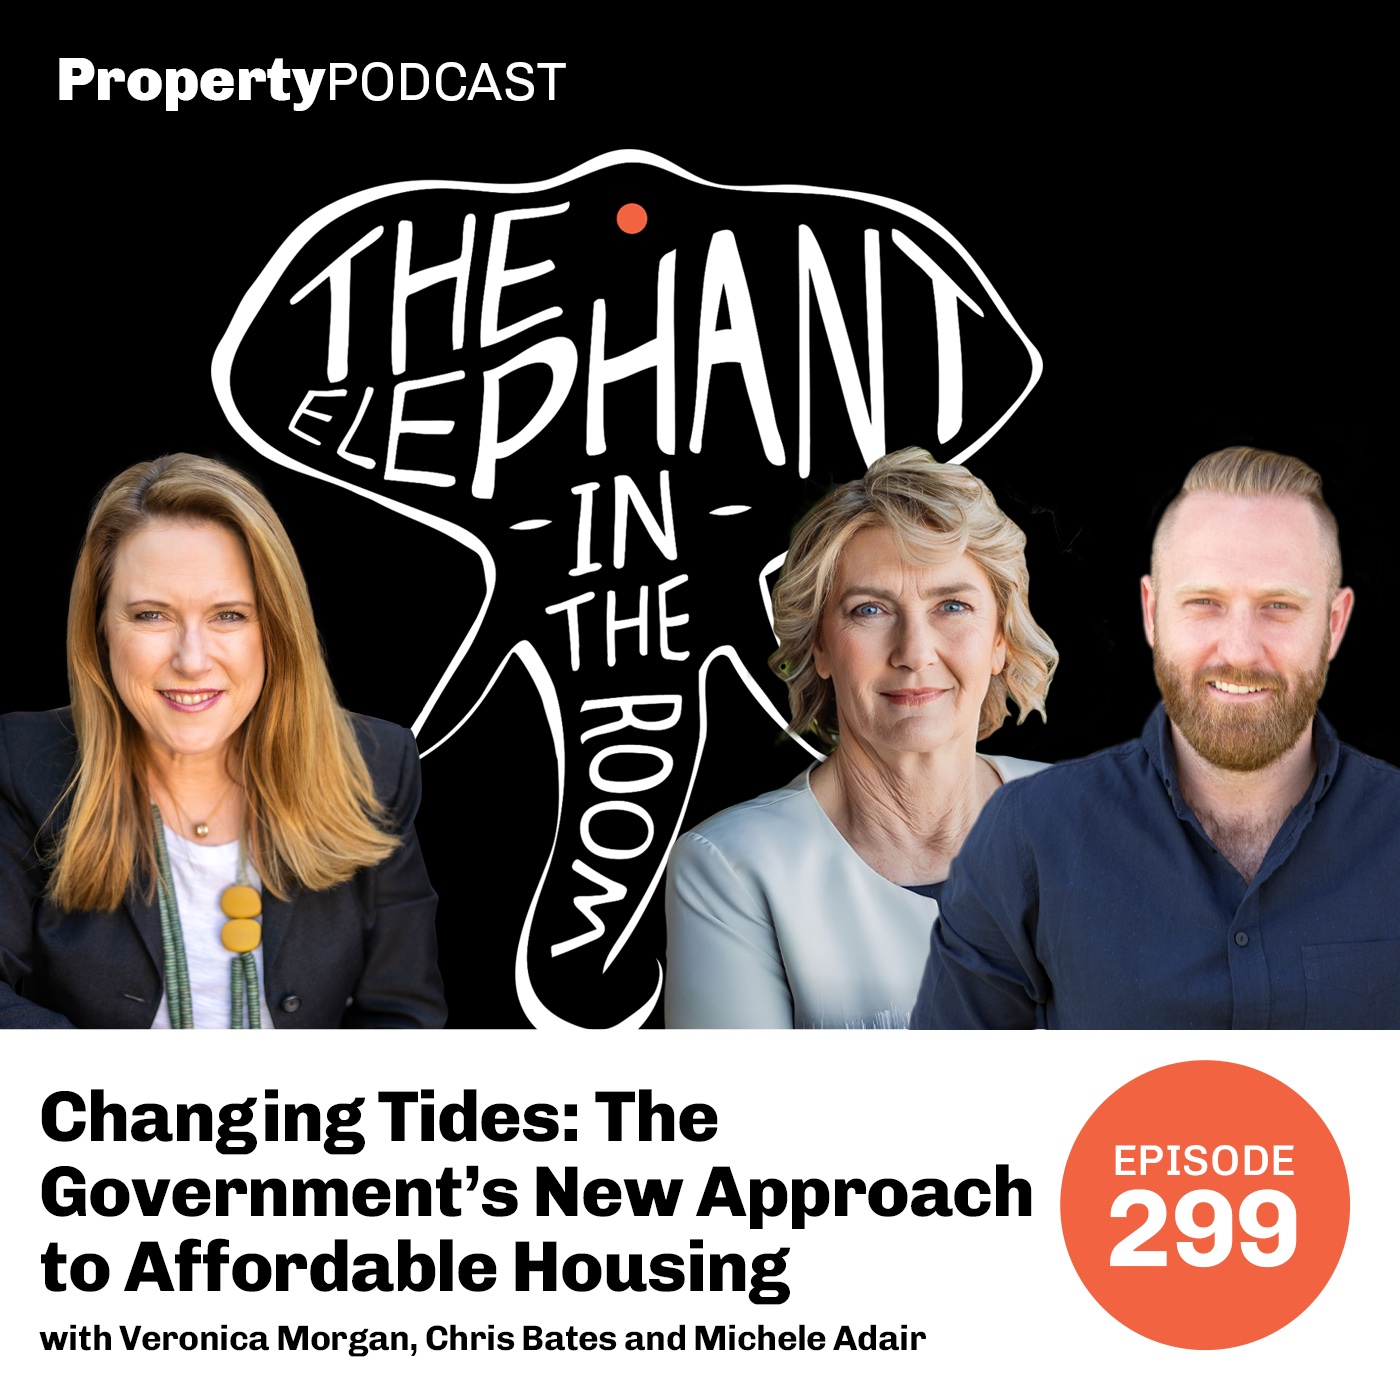 Changing Tides: The Government’s New Approach to Affordable Housing